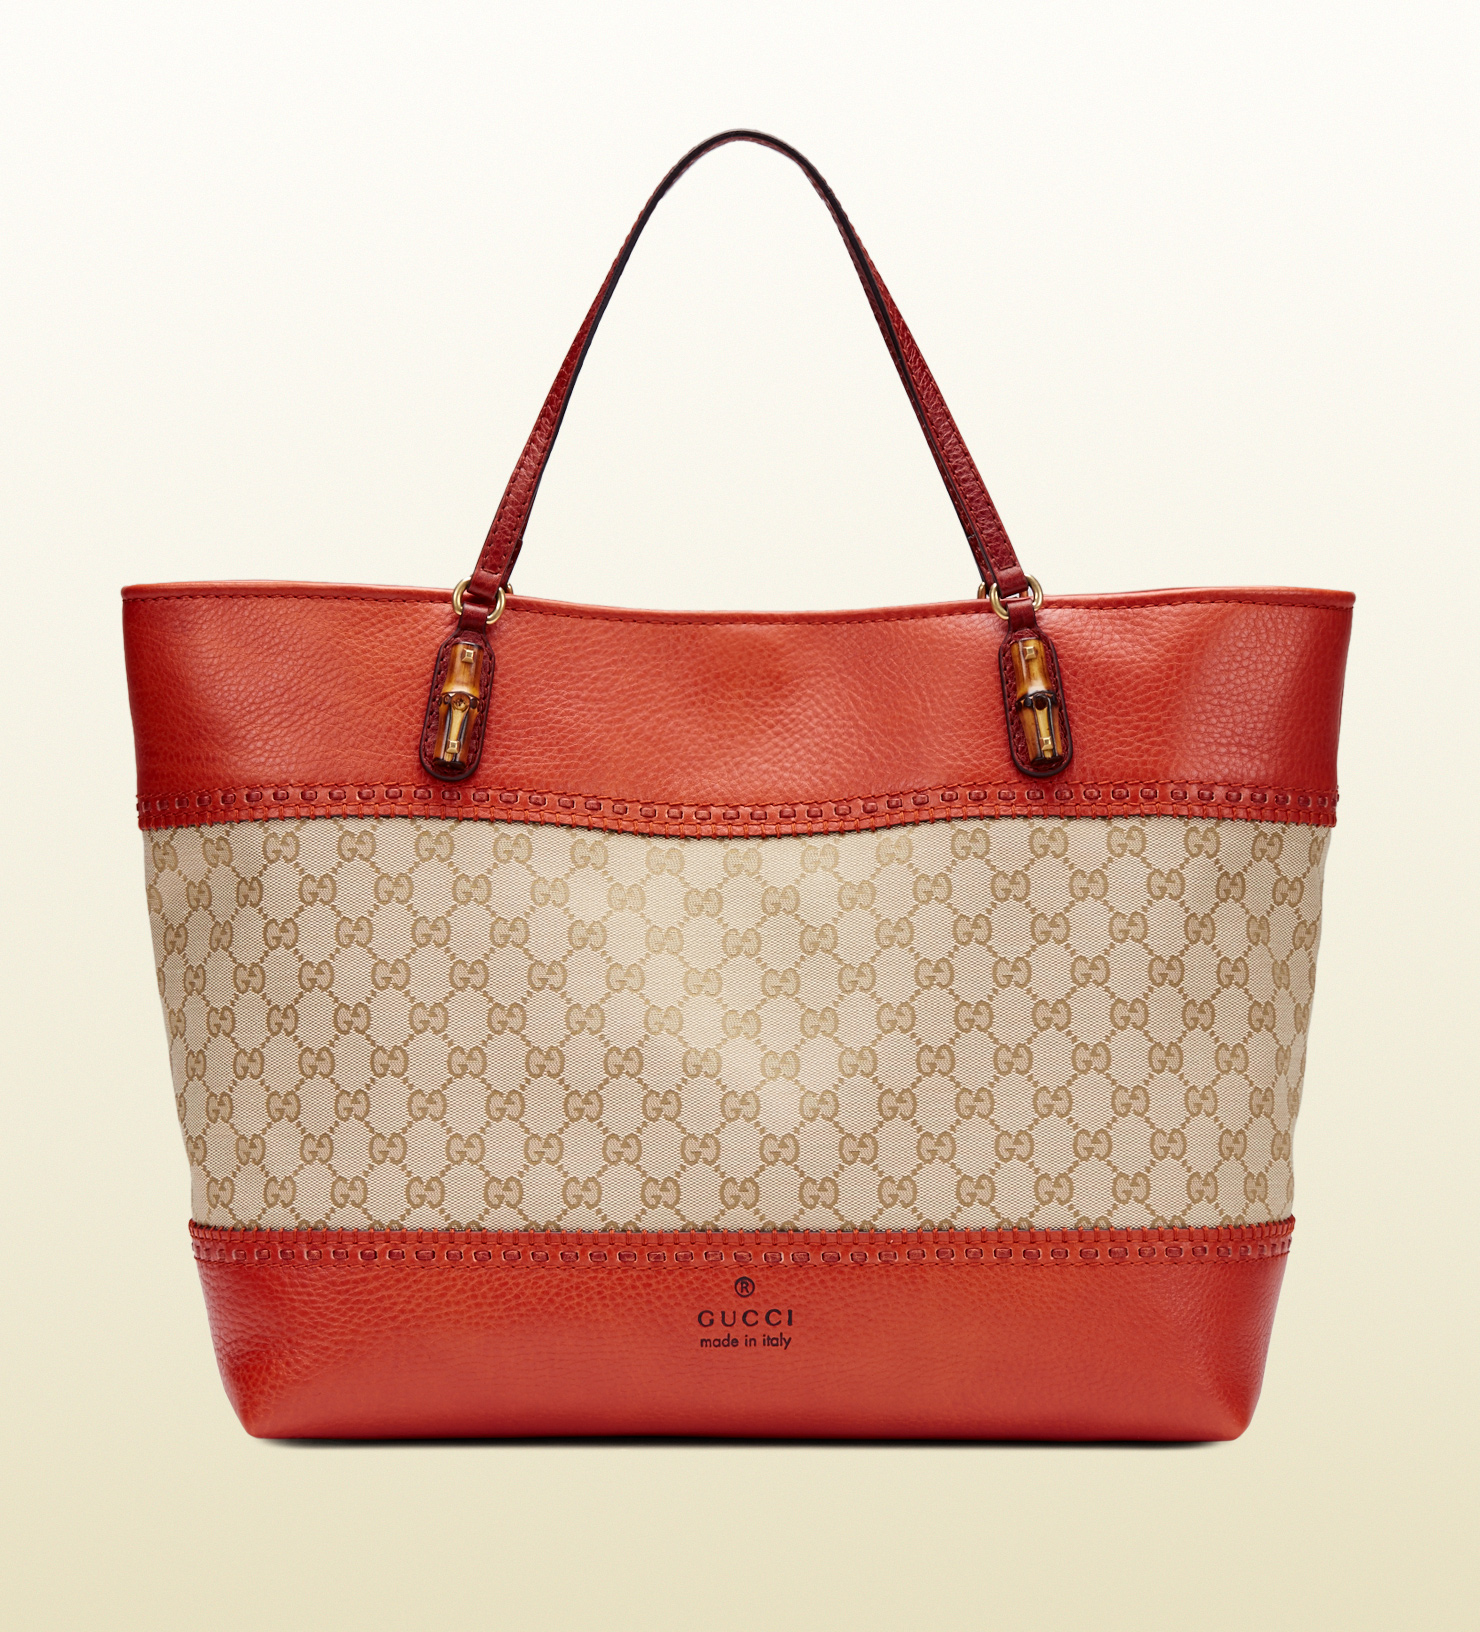 Gucci Laidback Crafty Original Gg Canvas Tote in Sand (Red) - Lyst